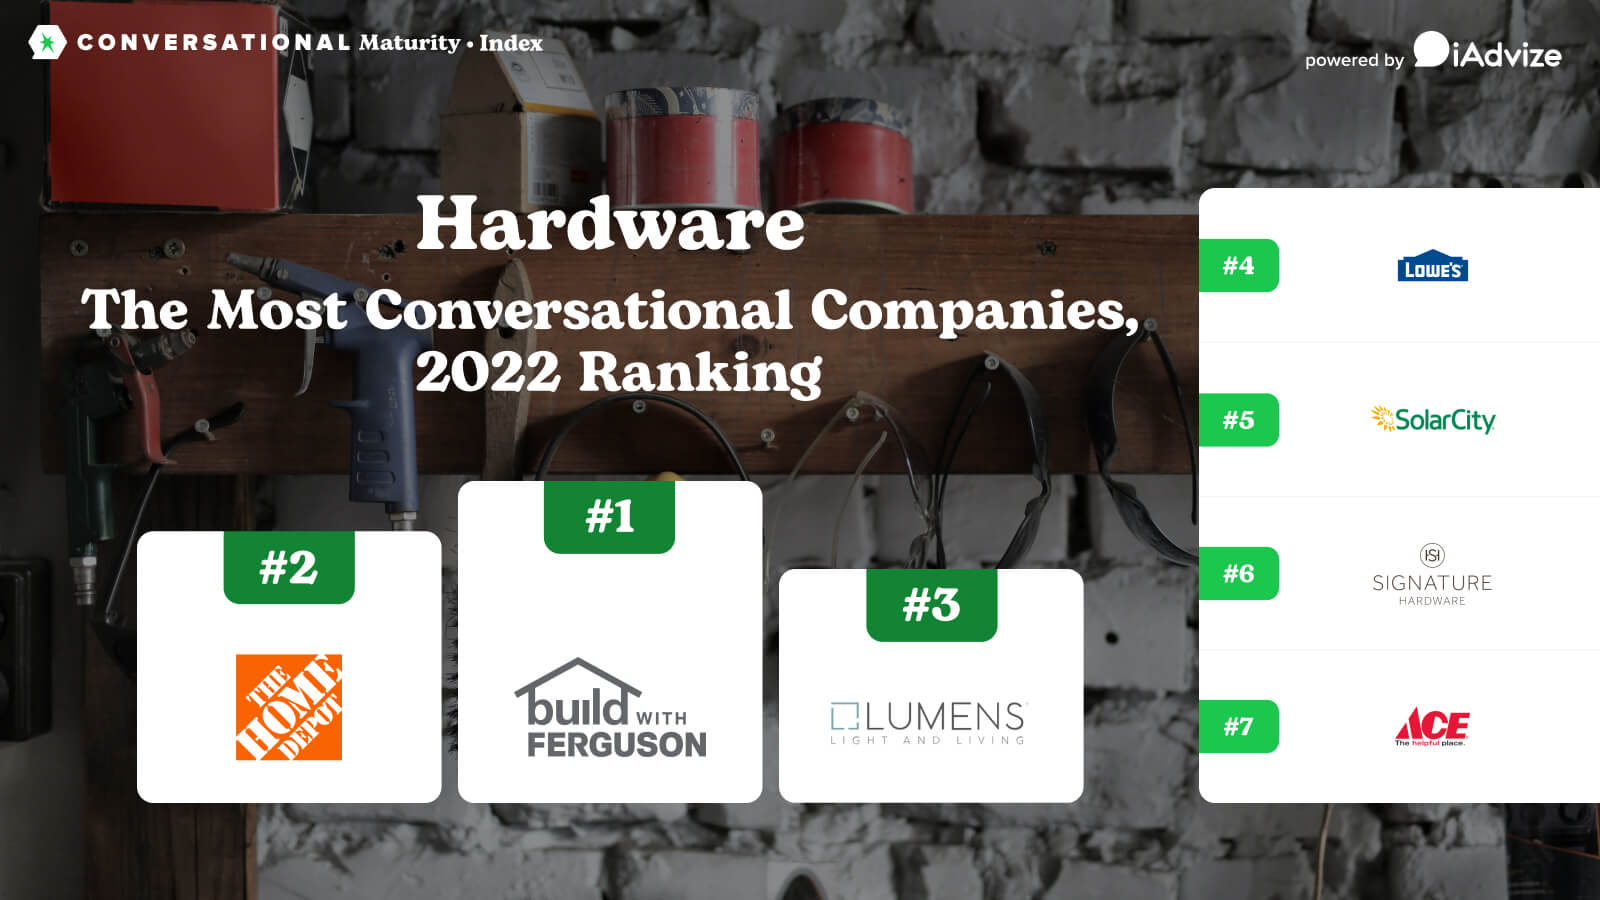  Featured image: Conversational maturity index for hardware companies - Read full post: Conversational Maturity Index: Hardware Companies 2022 Ranking